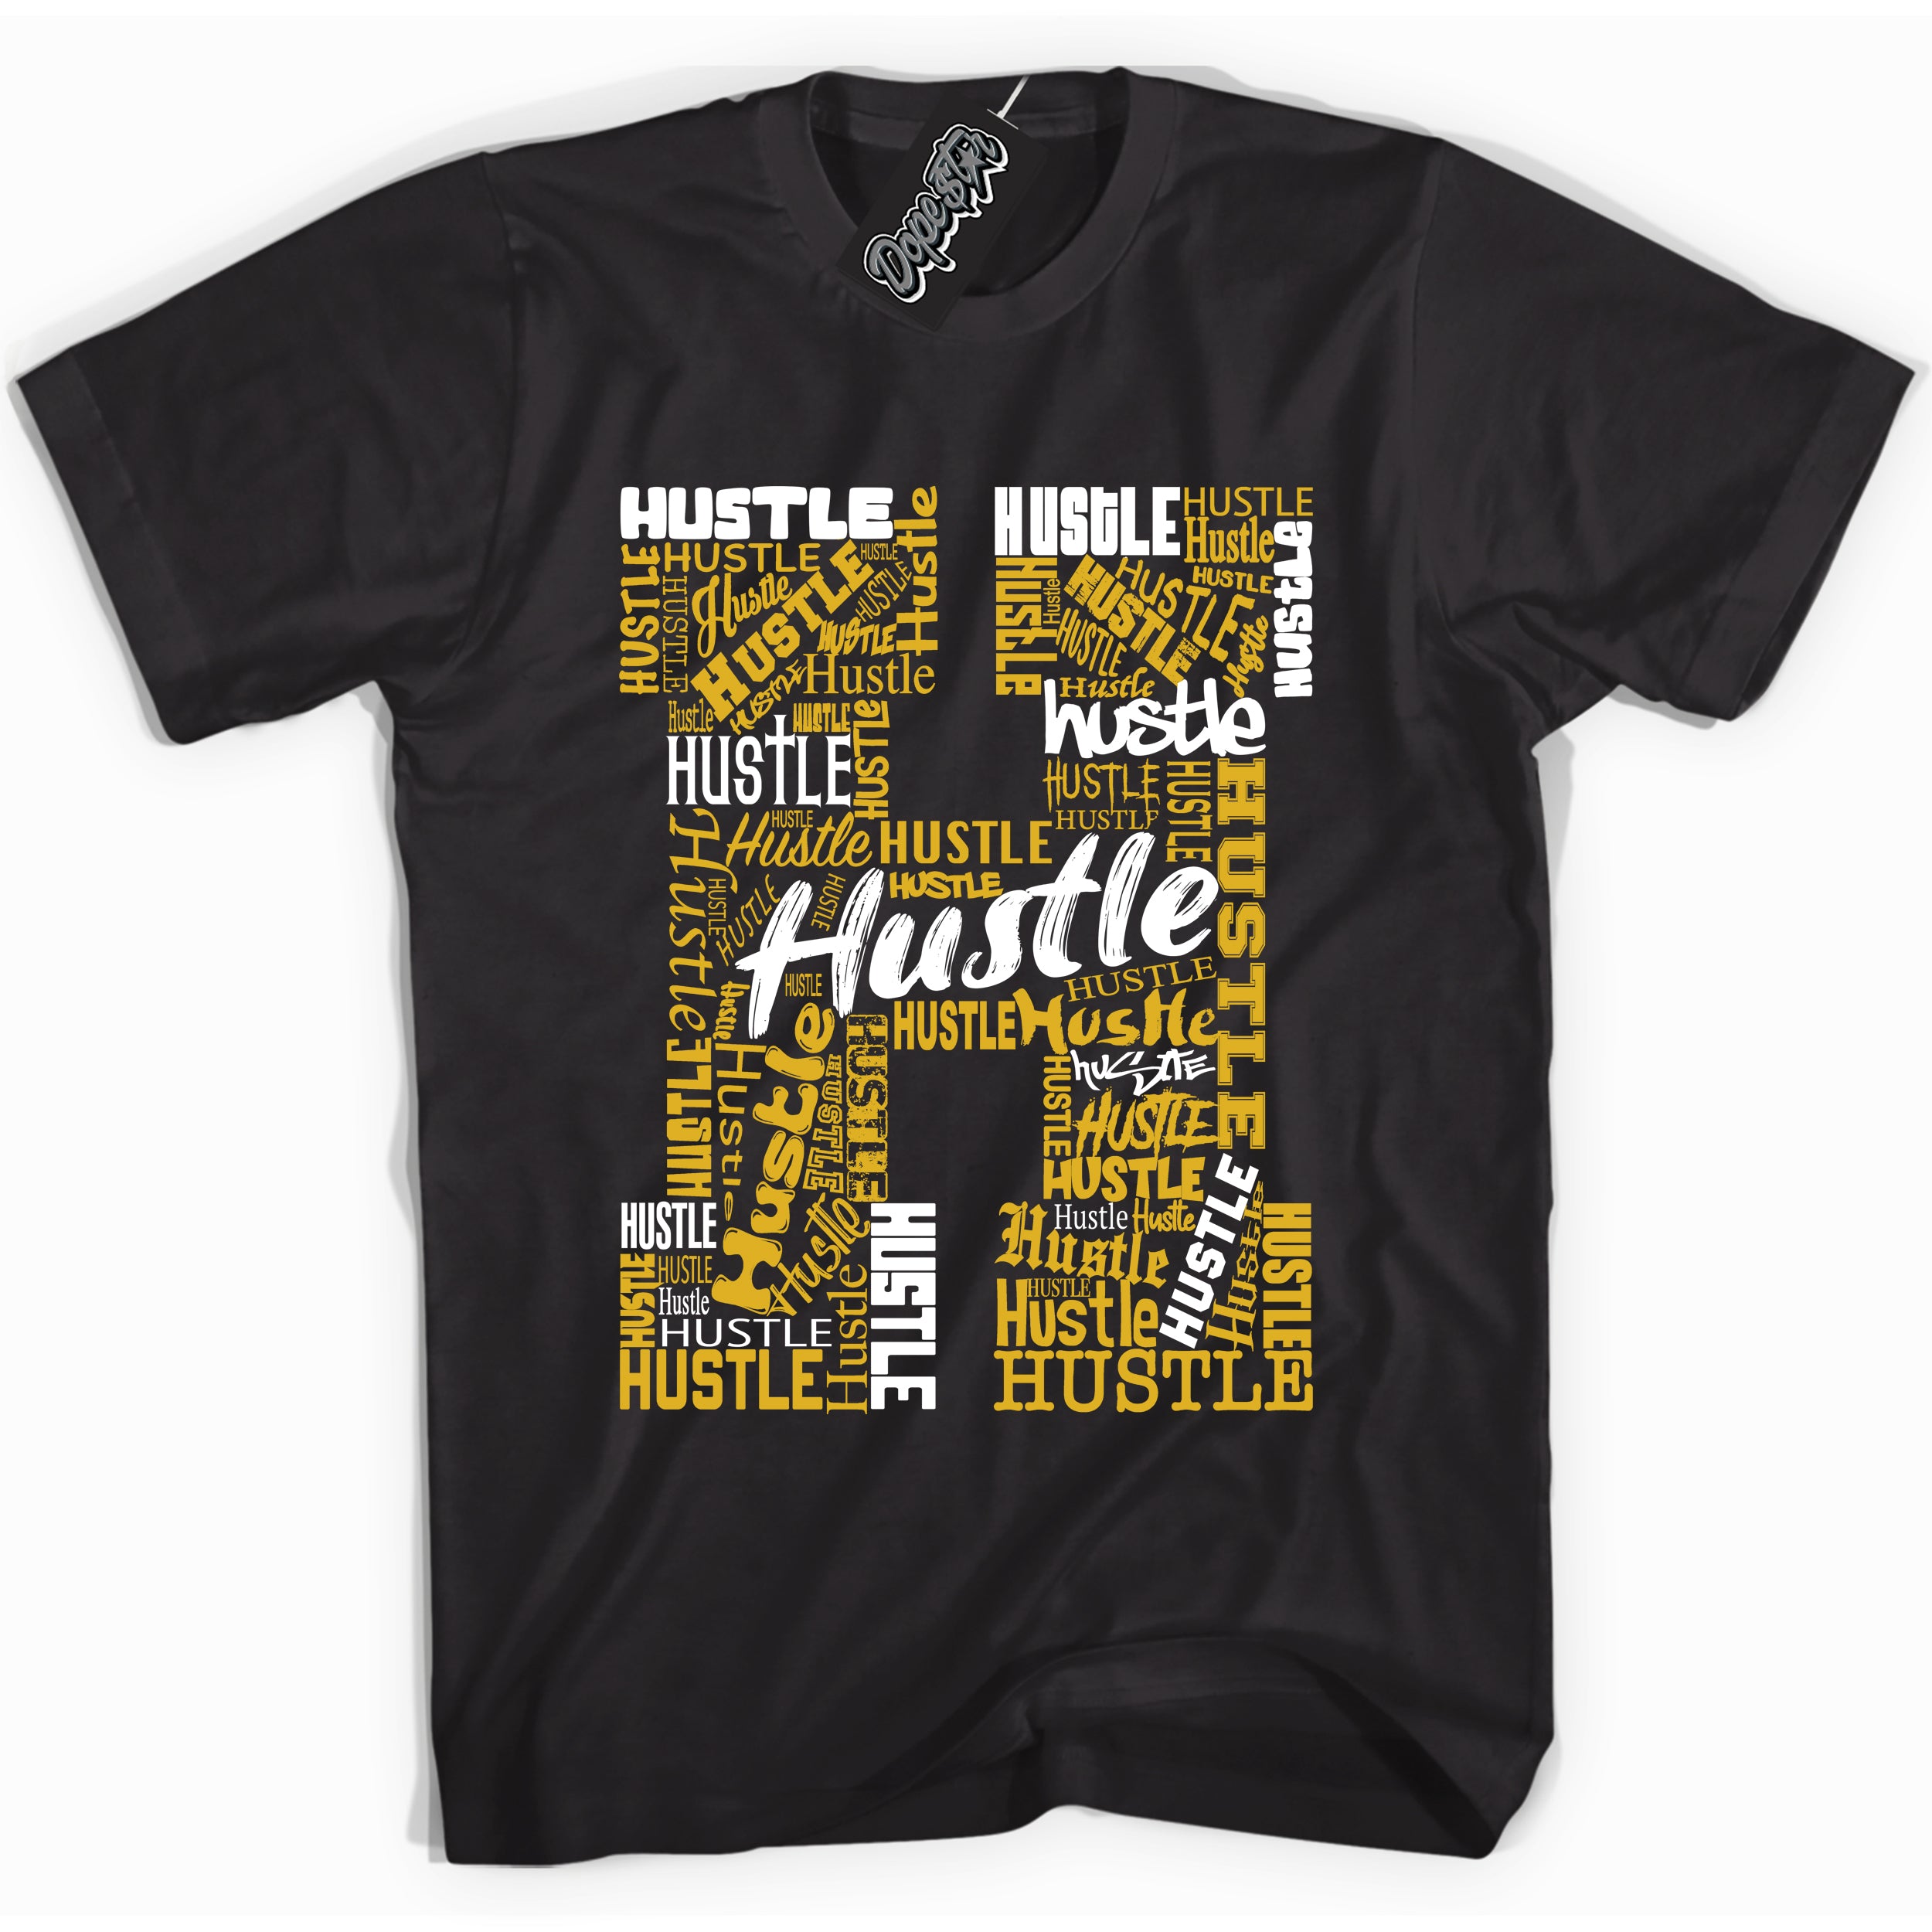 Cool Black Shirt With Hustle H design That Perfectly Matches YELLOW OCHRE 6s Sneakers.